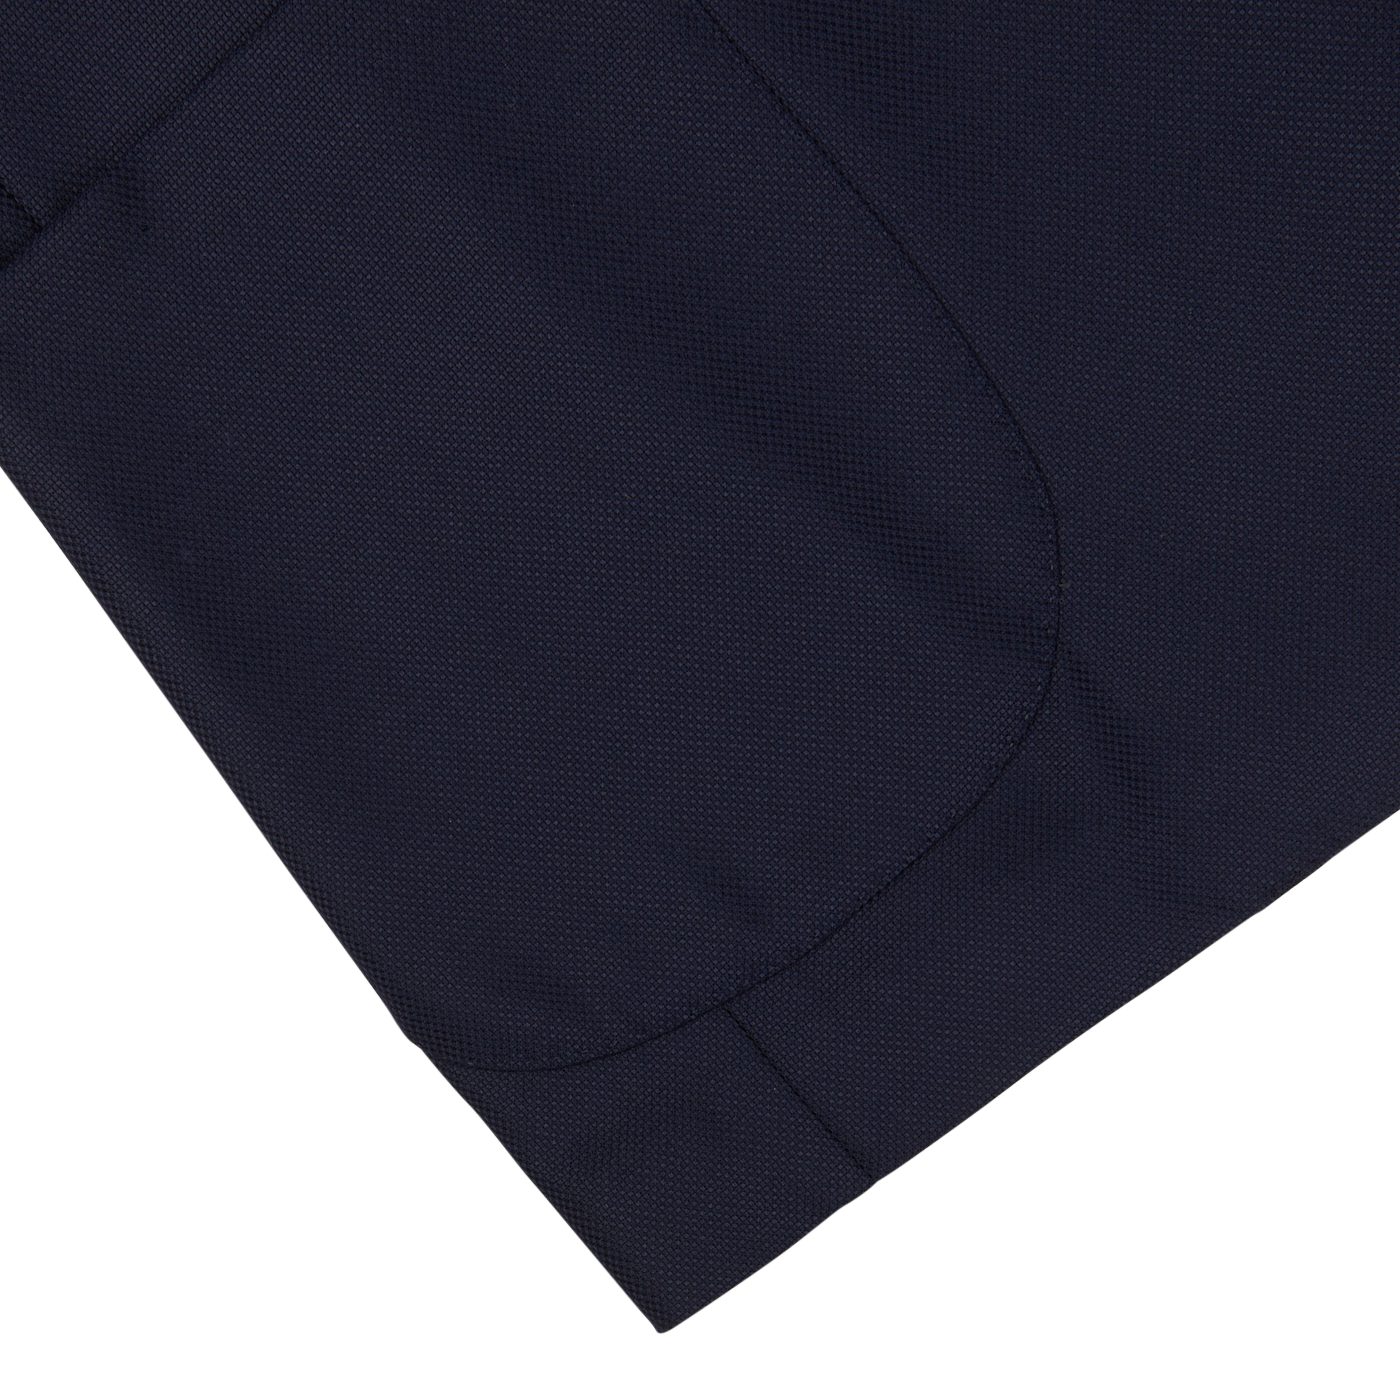 Close-up of a Navy Blue Wool Hopsack Blazer fabric with a stitched hem on a white background by Baltzar Sartorial.